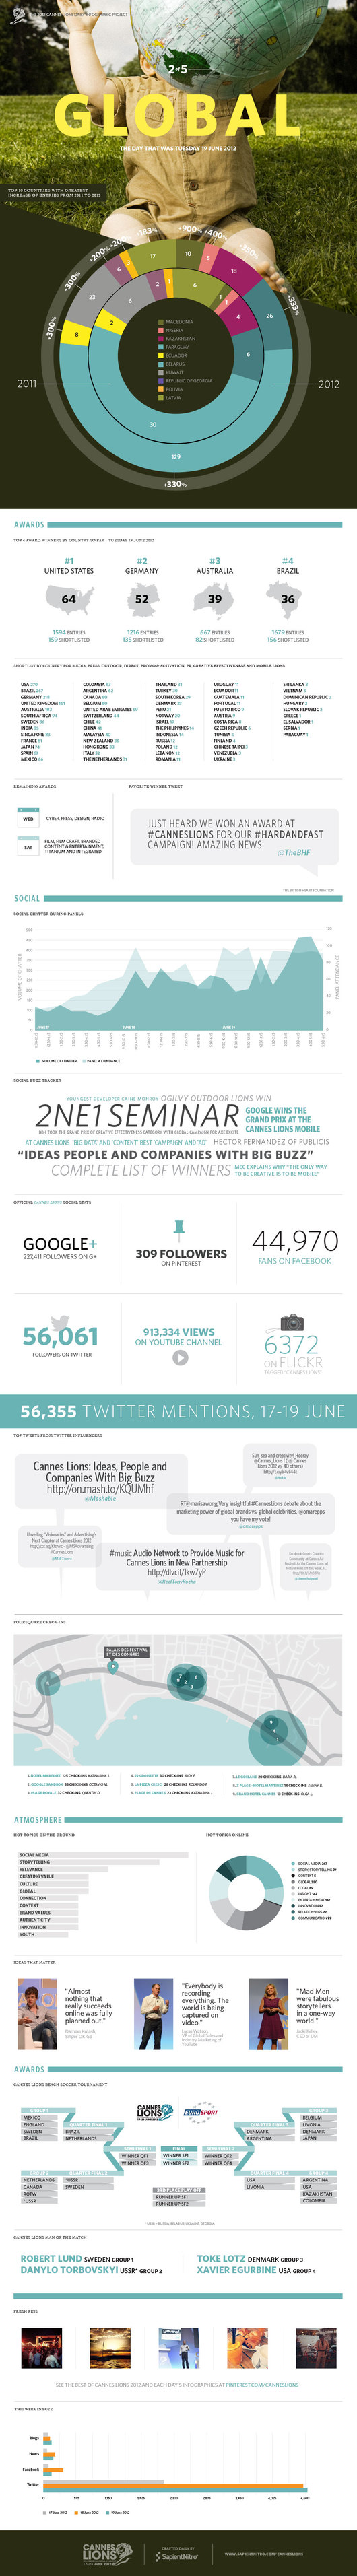 Infographic_Cannes_Lions_TUESDAY.jpeg